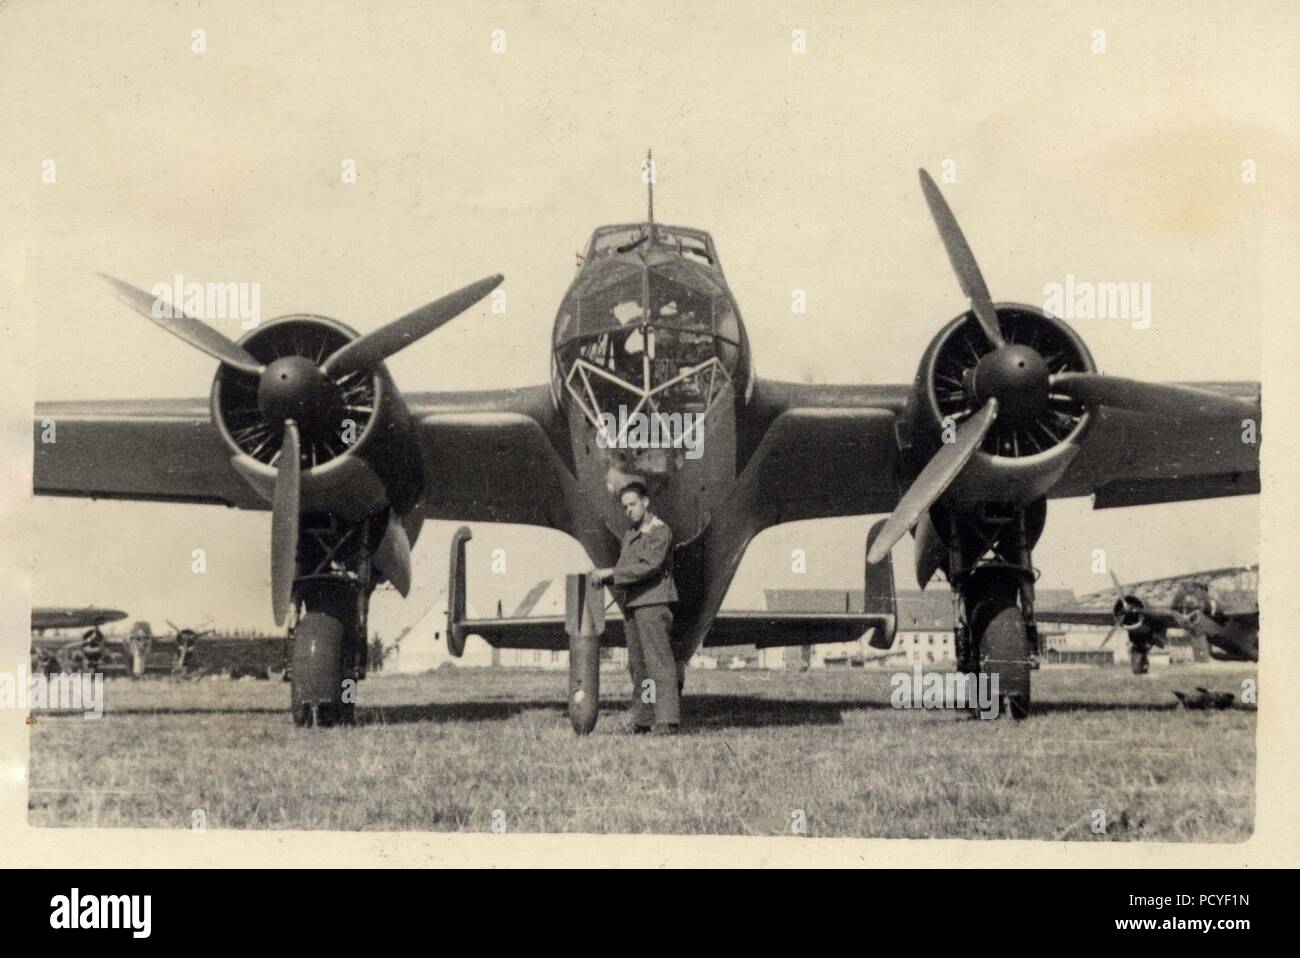 Image from the photo album of Oberfeldwebel Gotthilf Benseler of 9. Staffel, Kampfgeschwader 3: A Luftwaffe airman of 9./KG 3 poses with a bomb in front of one of the unit's Dornier Do 17Z-2s during the Poland Campaign, September 1939. Stock Photo